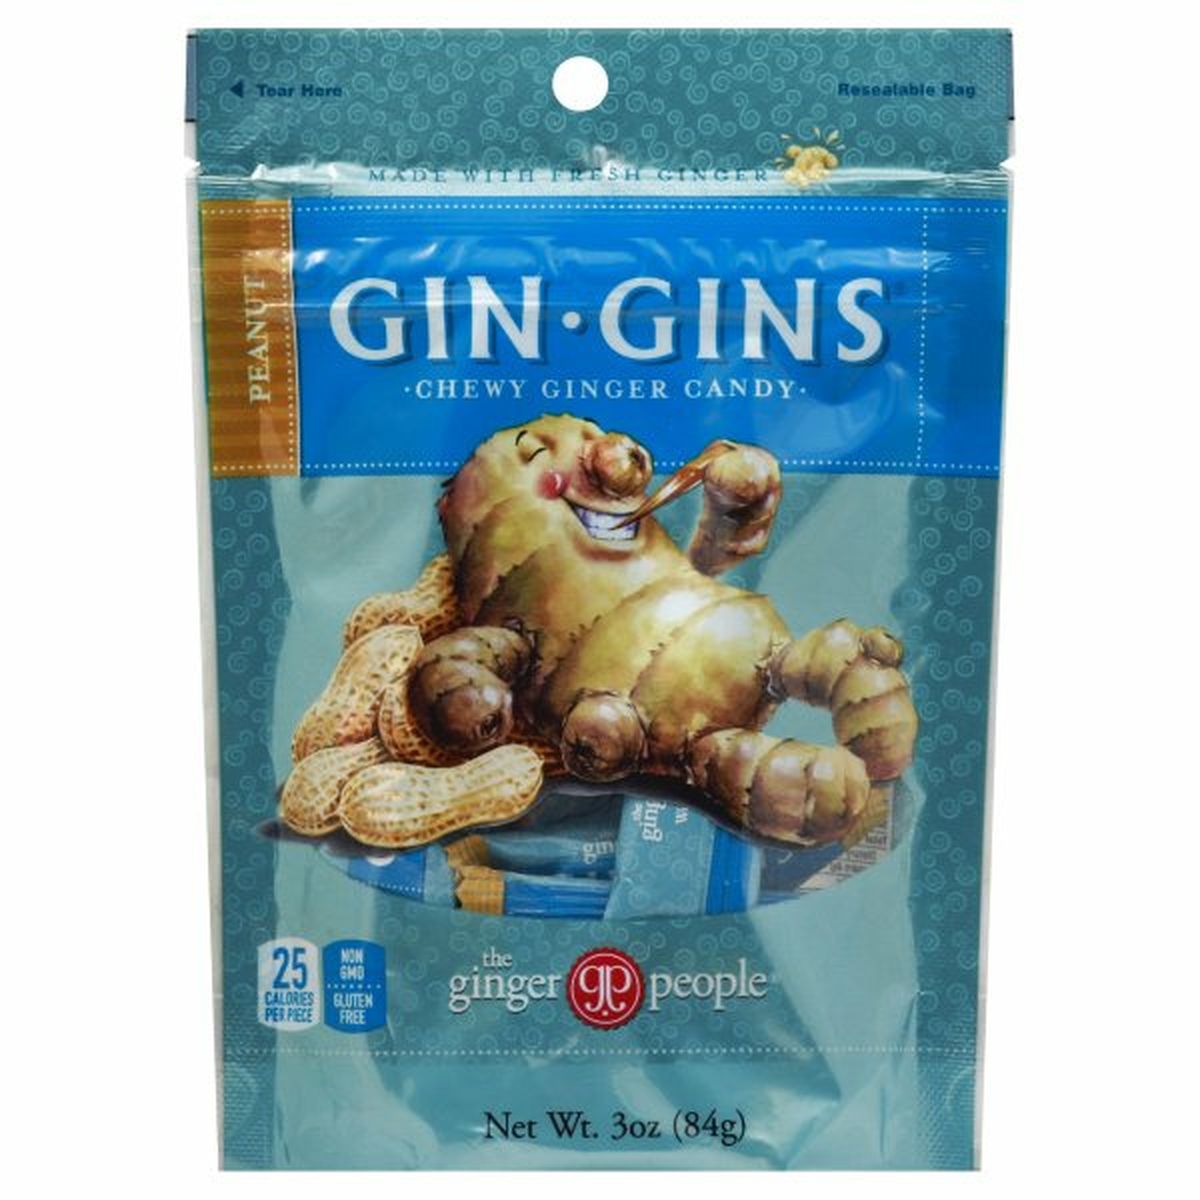 Calories in The Ginger People Gin Gins Ginger Candy, Chewy, Peanut